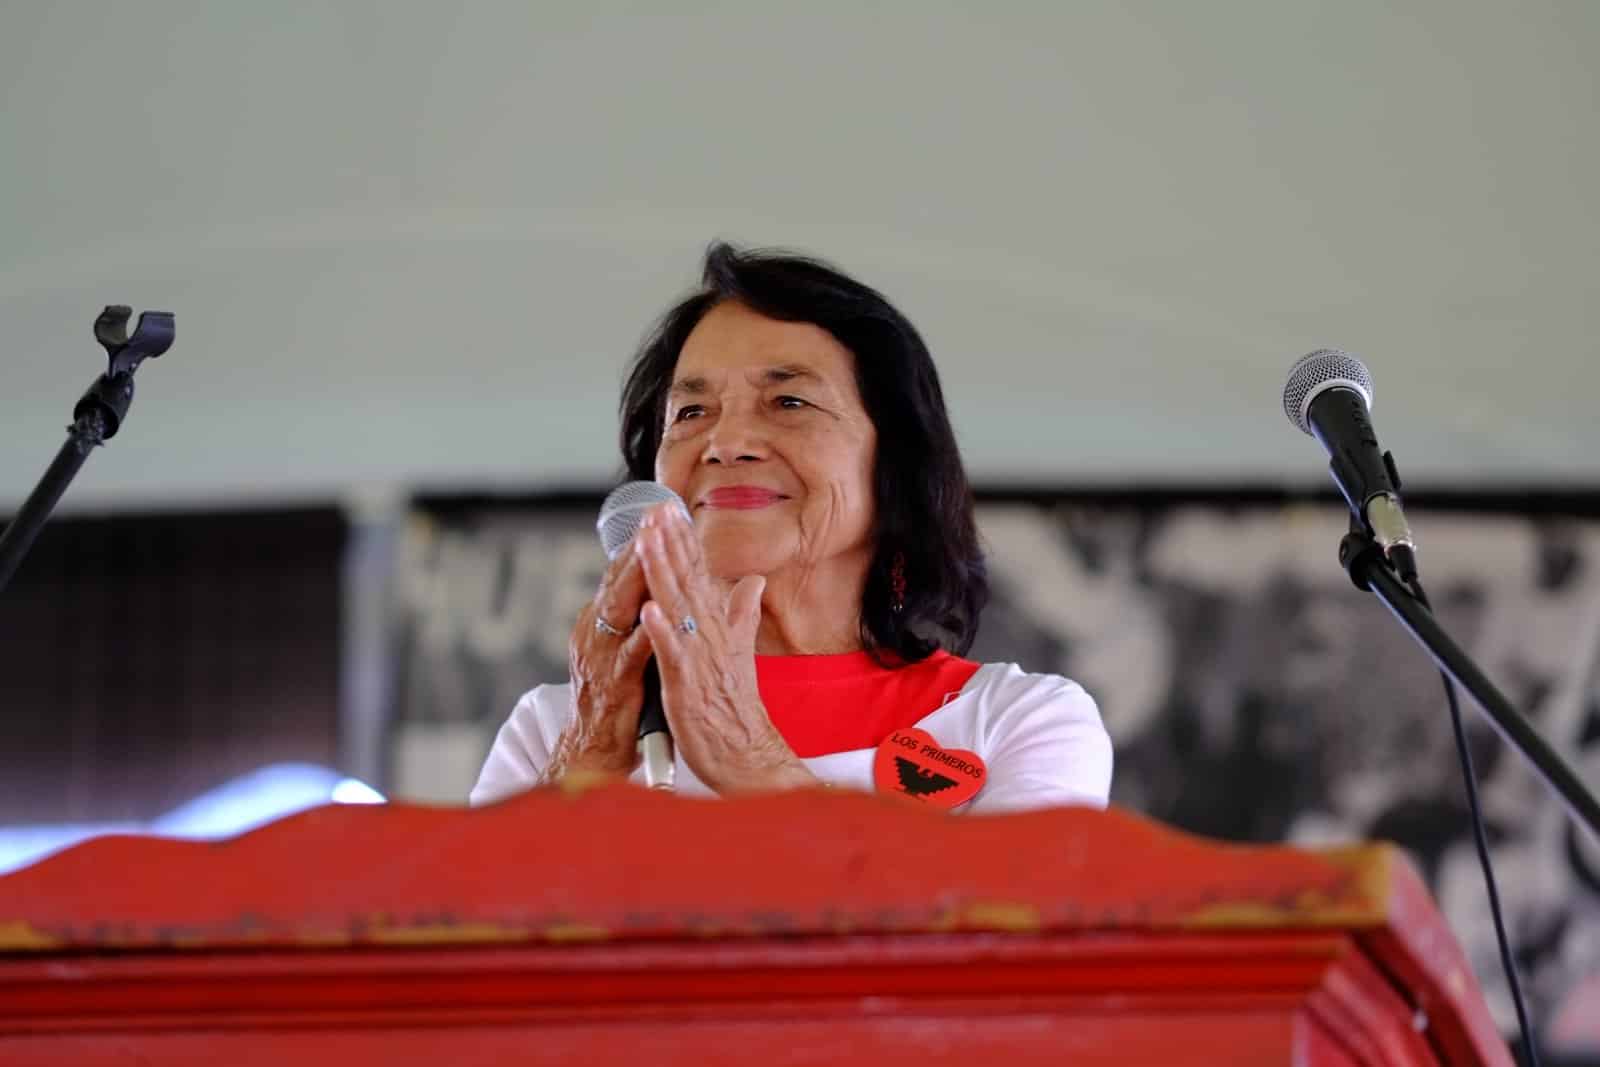 Image Credit: Shutterstock / Richard Thornton <p><span>Dolores Huerta co-founded the United Farm Workers and became a leading voice for labor and civil rights. Her activism inspired generations of women to fight for justice and equality.</span></p>